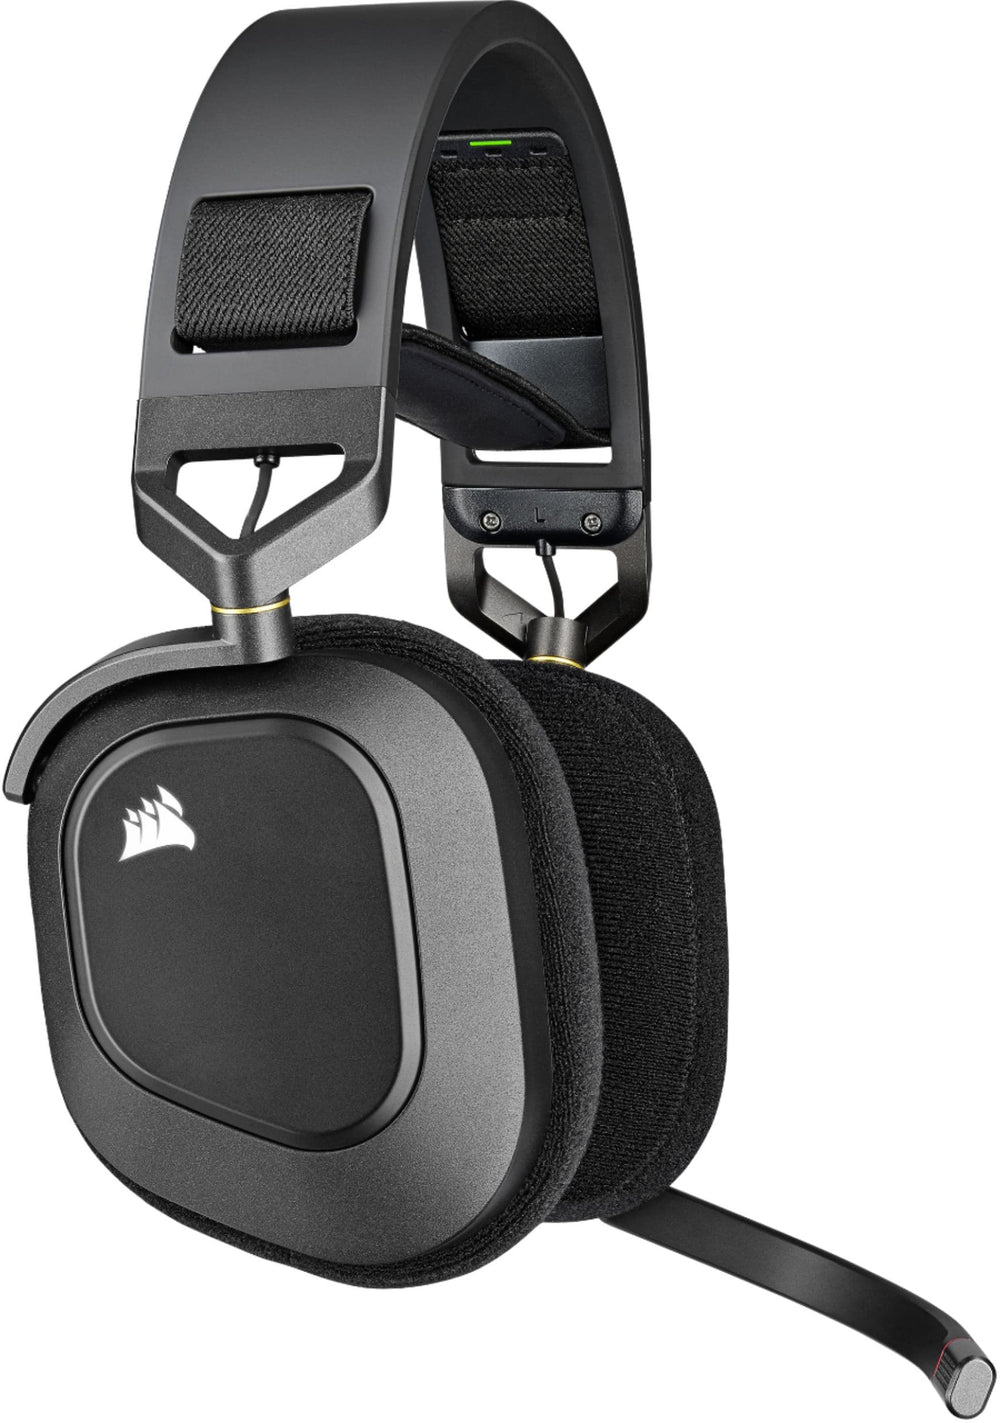 CORSAIR - HS80 RGB WIRELESS Dolby Atmos Gaming Headset for PC, PS5, and PS4 with Broadcast-Grade Omni-Directional Microphone - Carbon_1